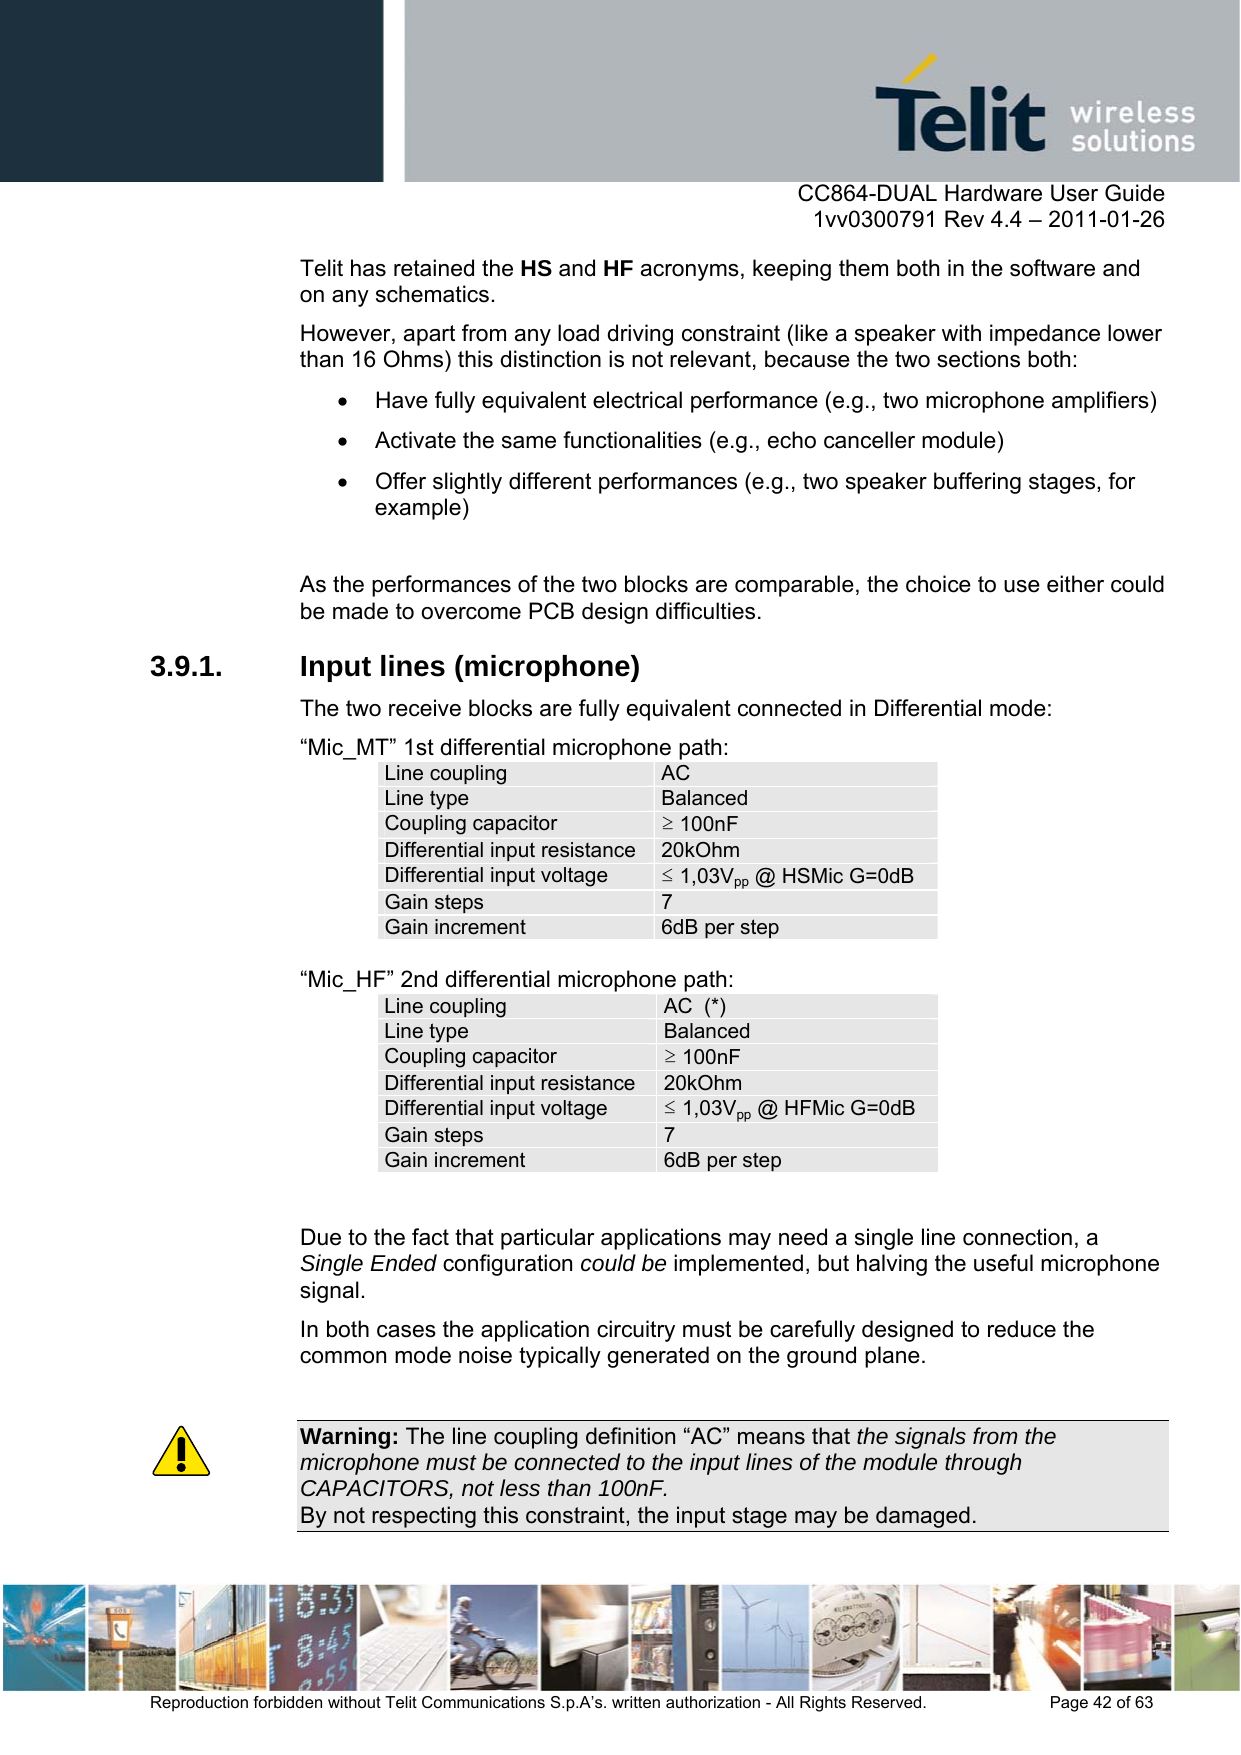      CC864-DUAL Hardware User Guide    1vv0300791 Rev 4.4 – 2011-01-26  Reproduction forbidden without Telit Communications S.p.A’s. written authorization - All Rights Reserved.    Page 42 of 63  Telit has retained the HS and HF acronyms, keeping them both in the software and on any schematics.  However, apart from any load driving constraint (like a speaker with impedance lower than 16 Ohms) this distinction is not relevant, because the two sections both:   Have fully equivalent electrical performance (e.g., two microphone amplifiers)   Activate the same functionalities (e.g., echo canceller module)   Offer slightly different performances (e.g., two speaker buffering stages, for example)  As the performances of the two blocks are comparable, the choice to use either could be made to overcome PCB design difficulties. 3.9.1.  Input lines (microphone) The two receive blocks are fully equivalent connected in Differential mode: “Mic_MT” 1st differential microphone path: Line coupling  AC Line type  Balanced Coupling capacitor  ≥ 100nF Differential input resistance 20kOhm Differential input voltage   ≤ 1,03Vpp @ HSMic G=0dB Gain steps  7Gain increment  6dB per step “Mic_HF” 2nd differential microphone path: Line coupling  AC  (*) Line type  Balanced Coupling capacitor  ≥ 100nF Differential input resistance  20kOhm Differential input voltage   ≤ 1,03Vpp @ HFMic G=0dB Gain steps  7Gain increment  6dB per step Due to the fact that particular applications may need a single line connection, a Single Ended configuration could be implemented, but halving the useful microphone signal. In both cases the application circuitry must be carefully designed to reduce the common mode noise typically generated on the ground plane.   Warning: The line coupling definition “AC” means that the signals from the microphone must be connected to the input lines of the module through CAPACITORS, not less than 100nF. By not respecting this constraint, the input stage may be damaged. 